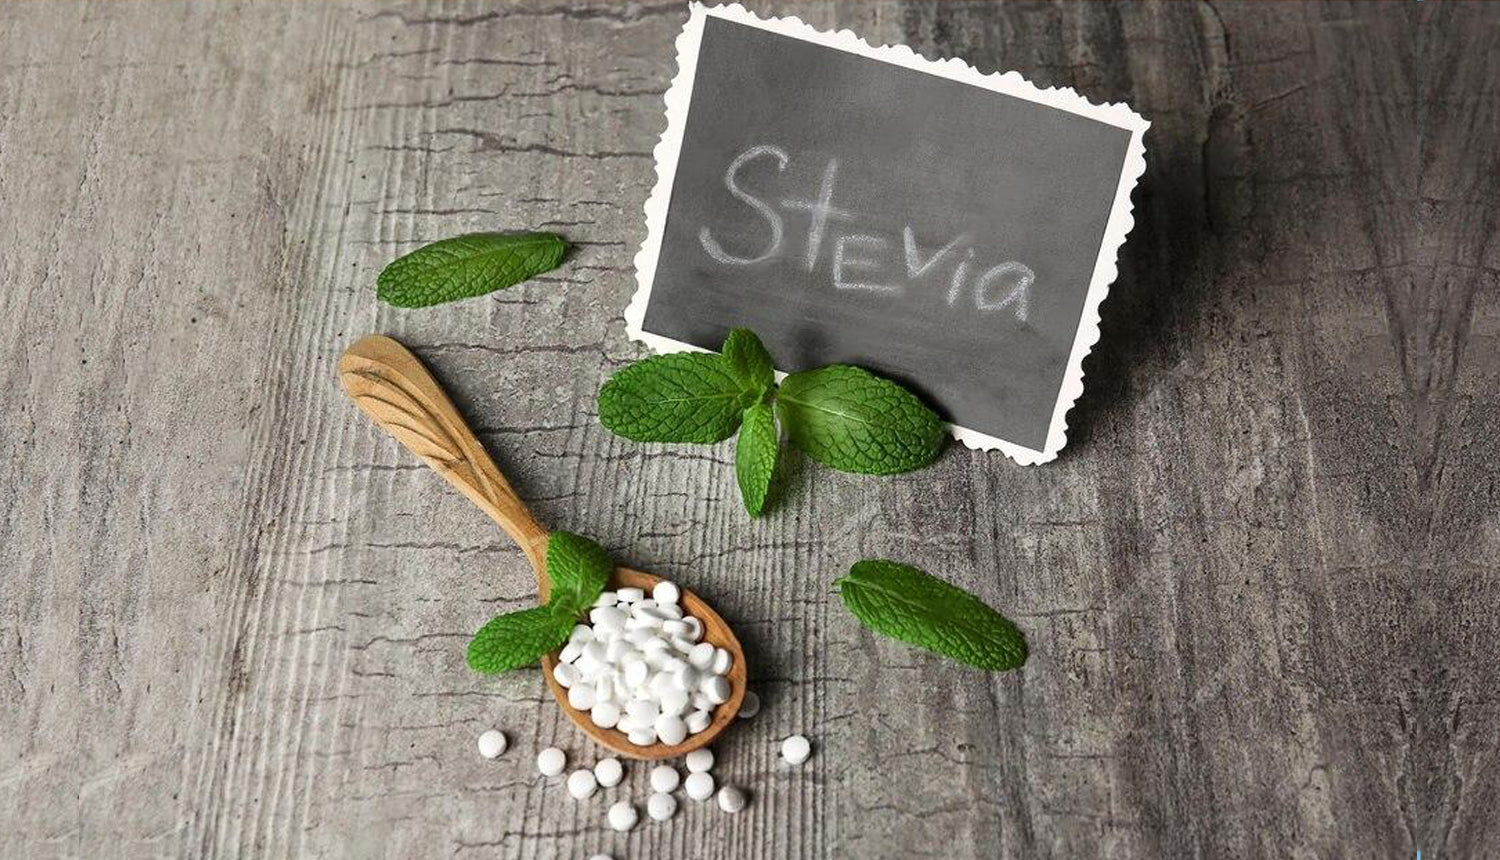 Top 5 advantages of stevia: Health benefits, facts, and safety